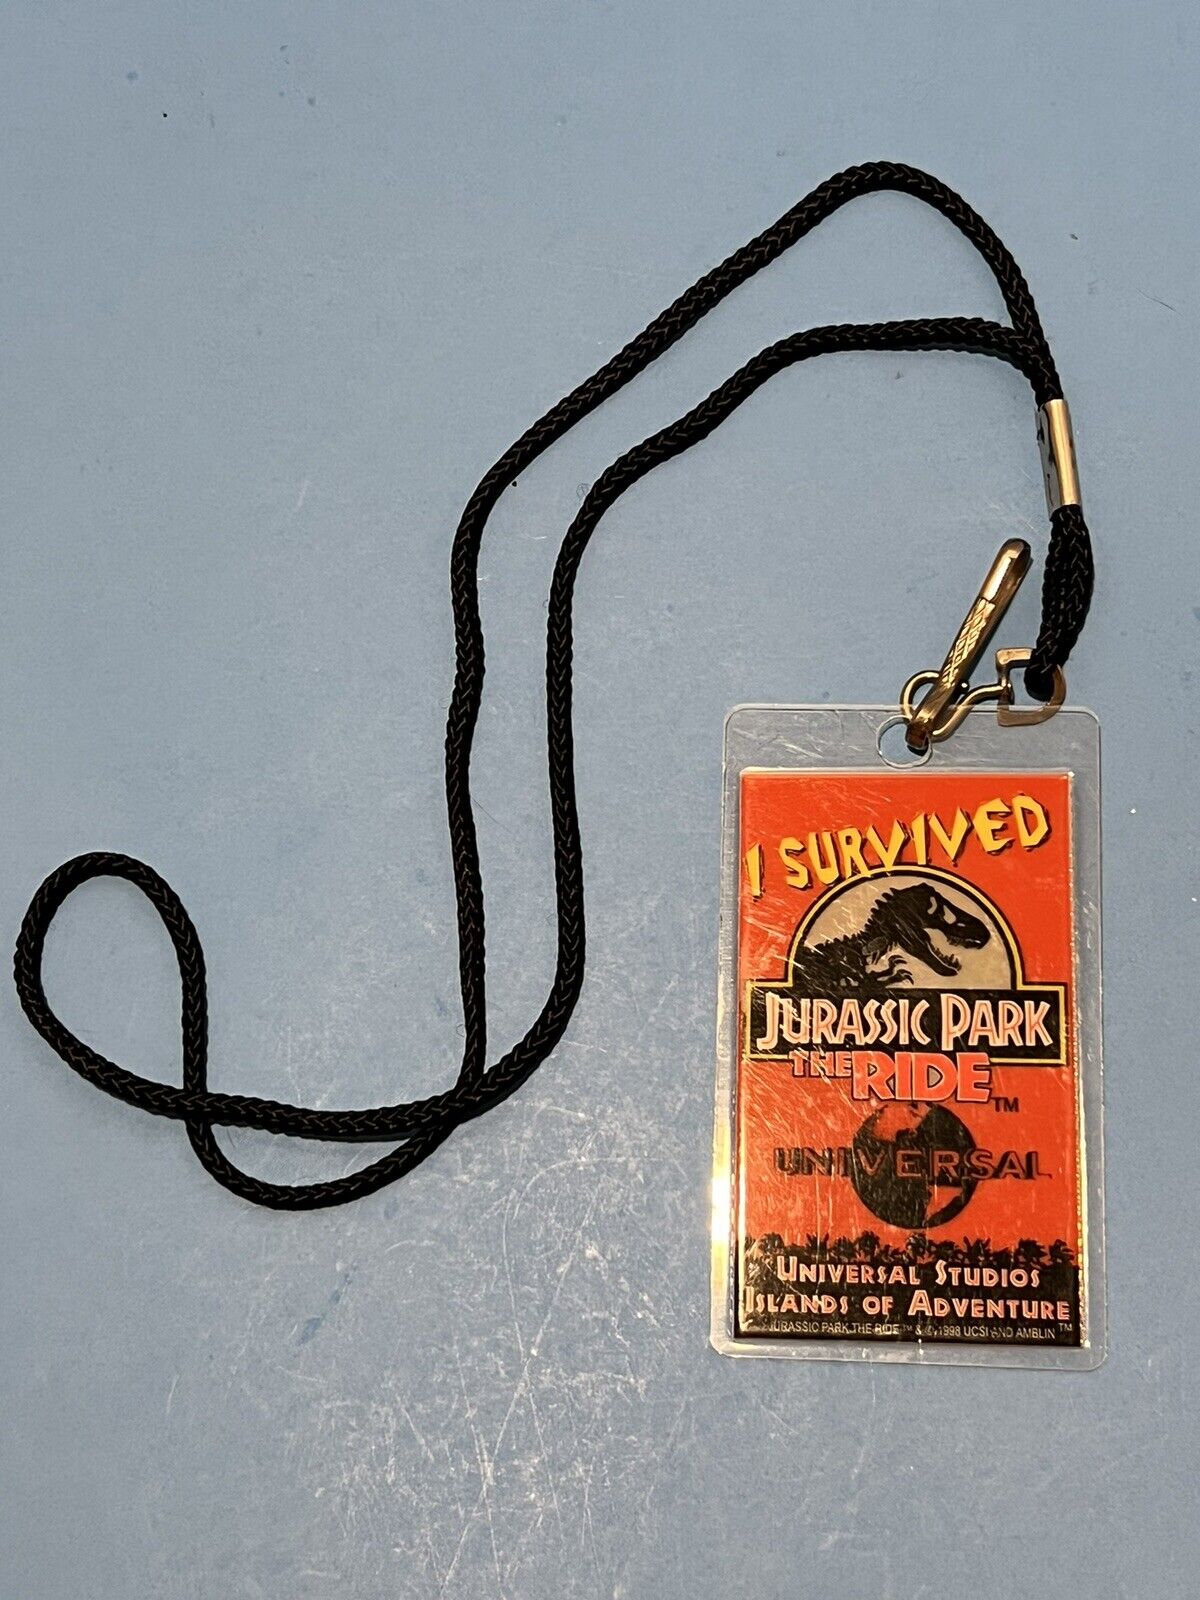 I Survived Jurassic Park The Ride 1998 Laminated Card From Universal Studios